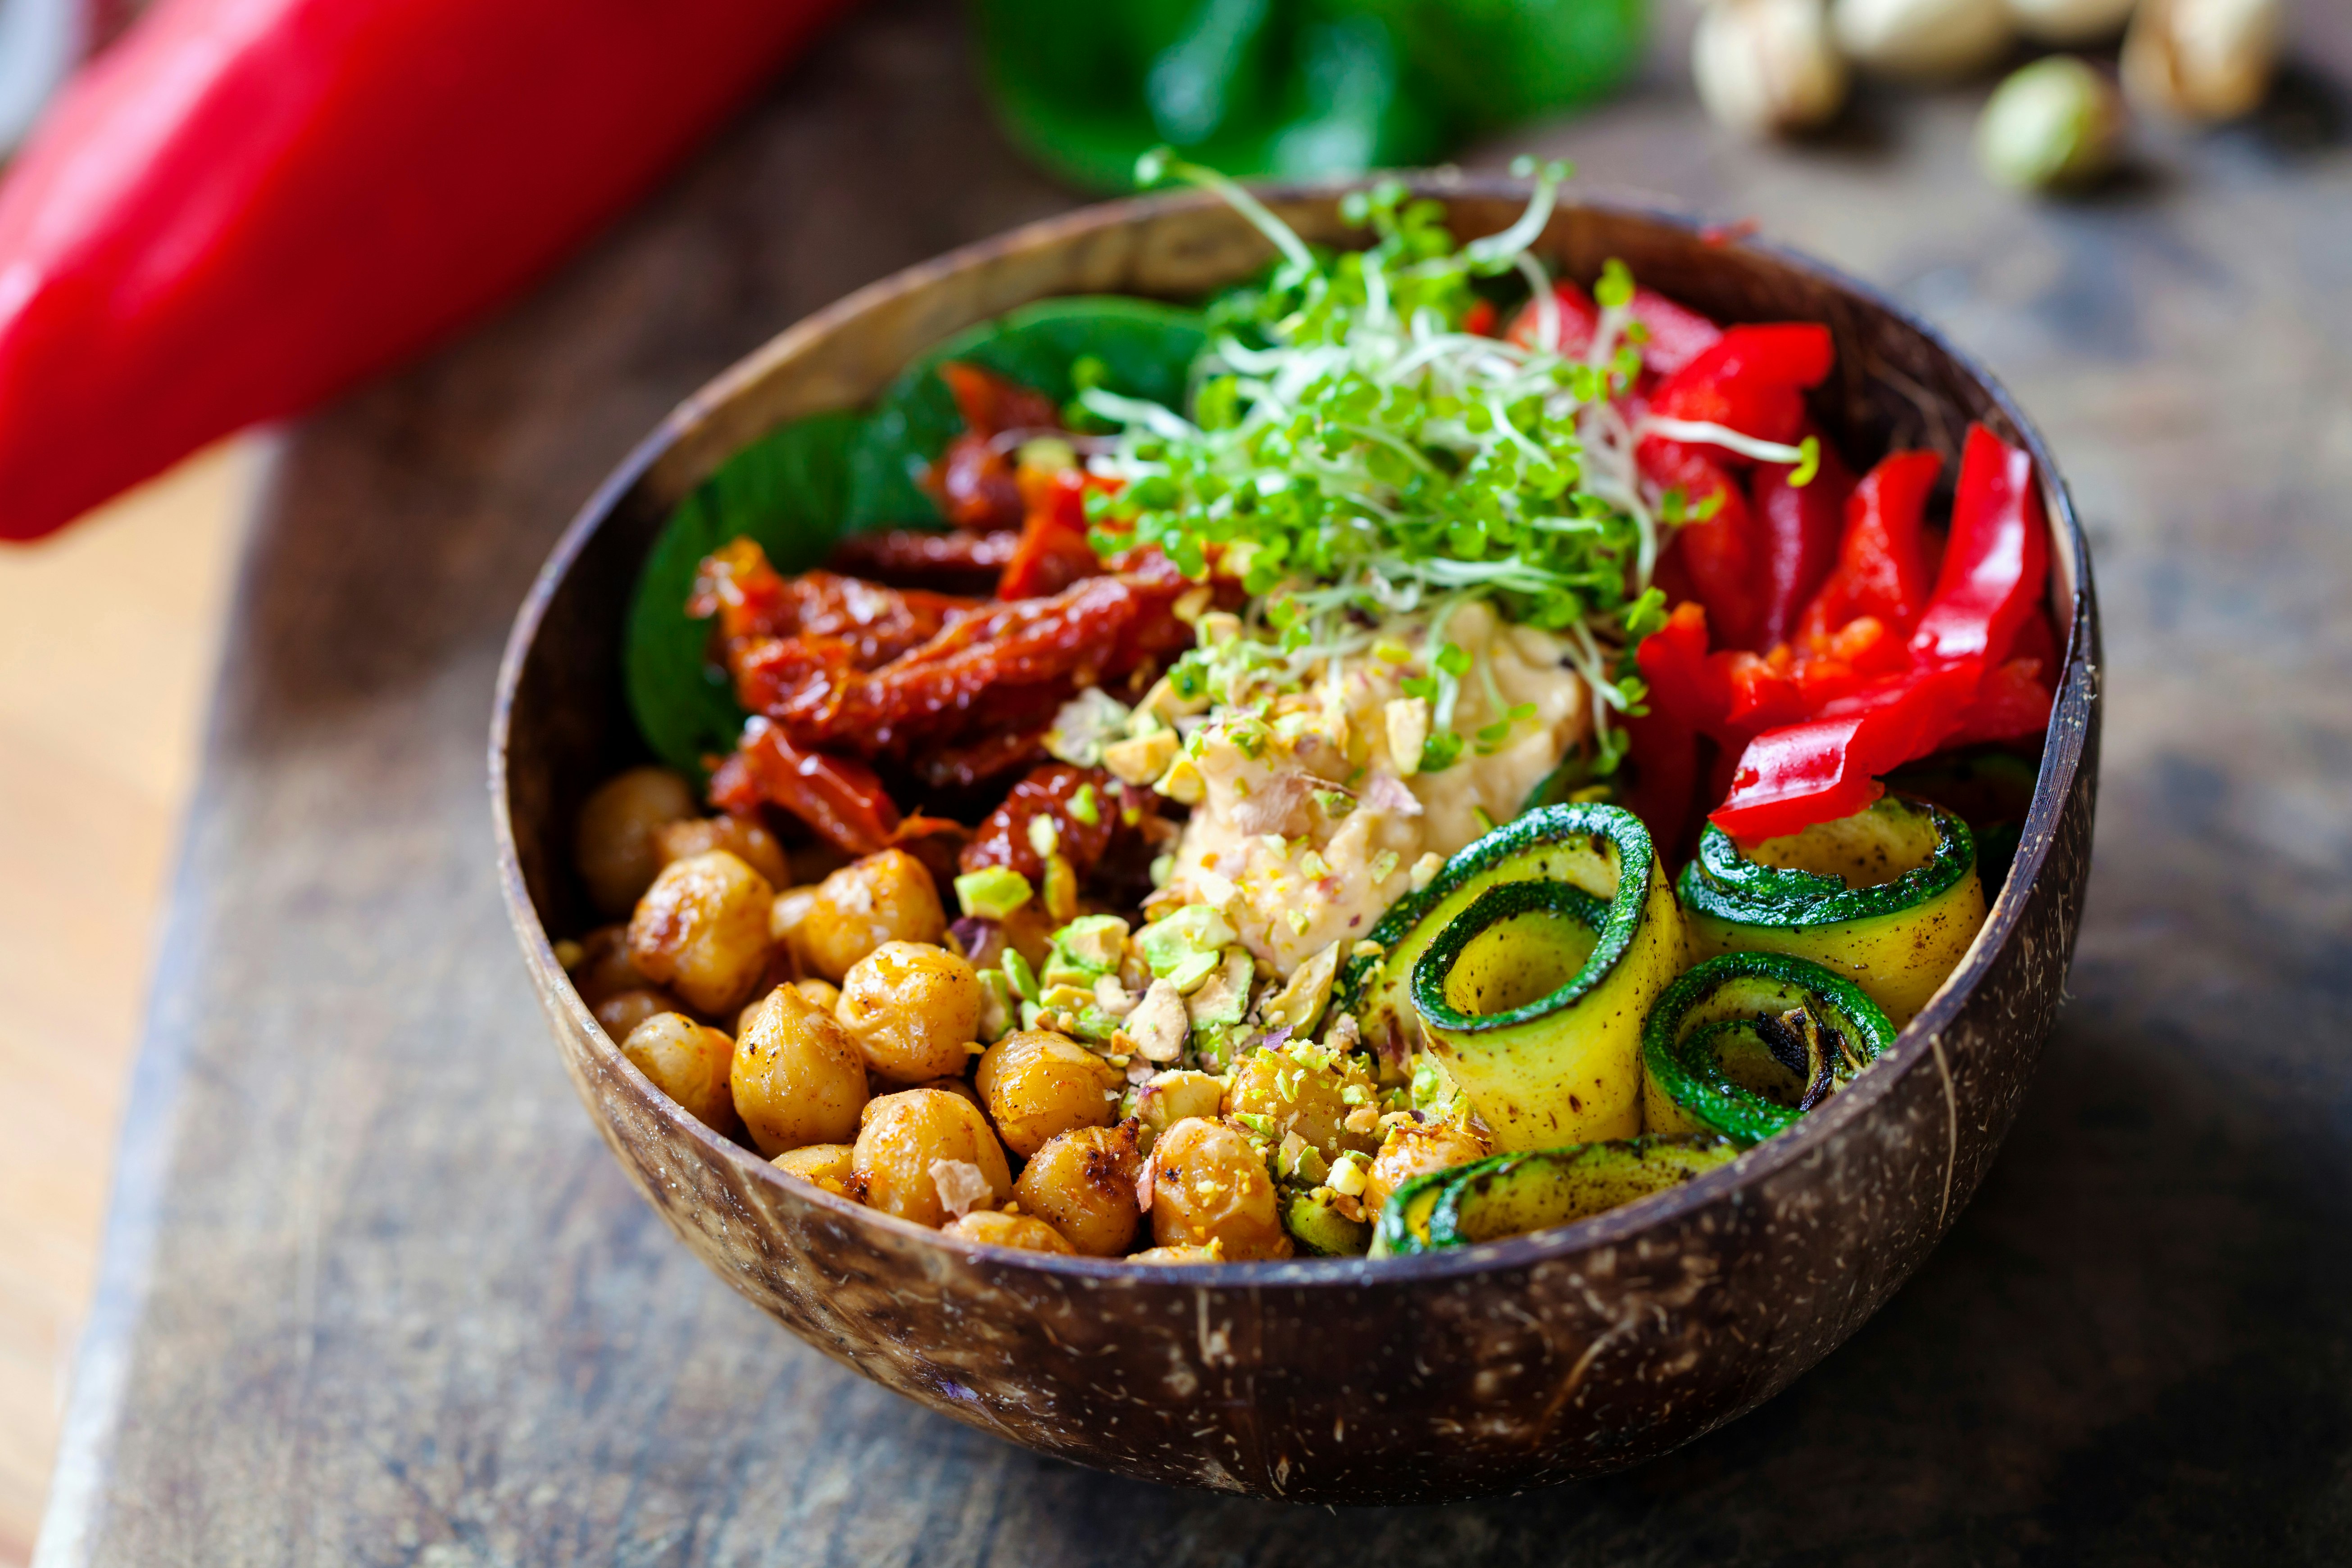 Closeup of a bowl filled with chickpeas, cucumbers, red peppers, sun-dried tomatoes and grains